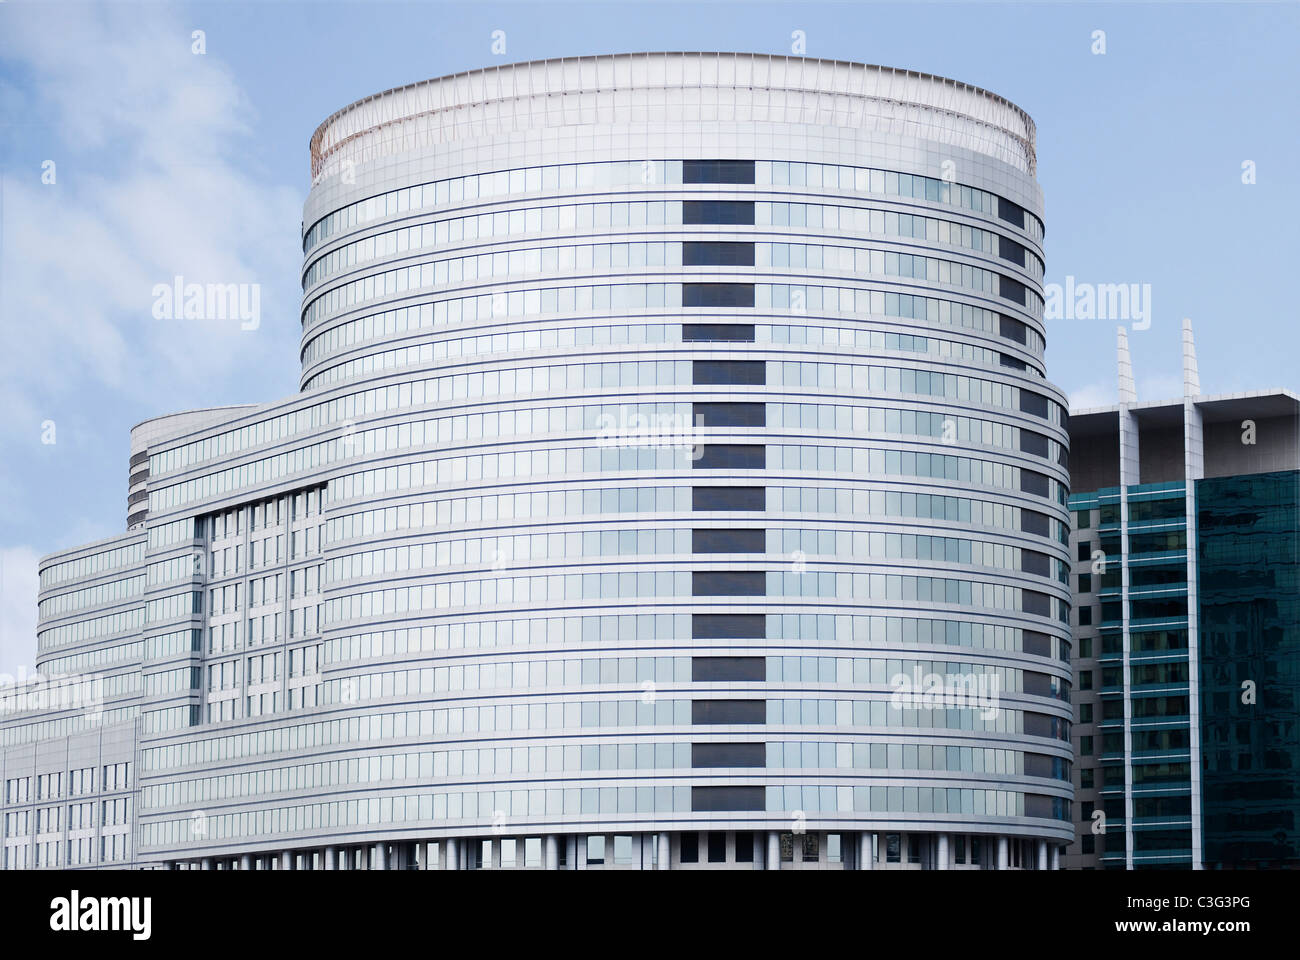 Low angle view of an office building, Gurgaon, Haryana, India Stock Photo